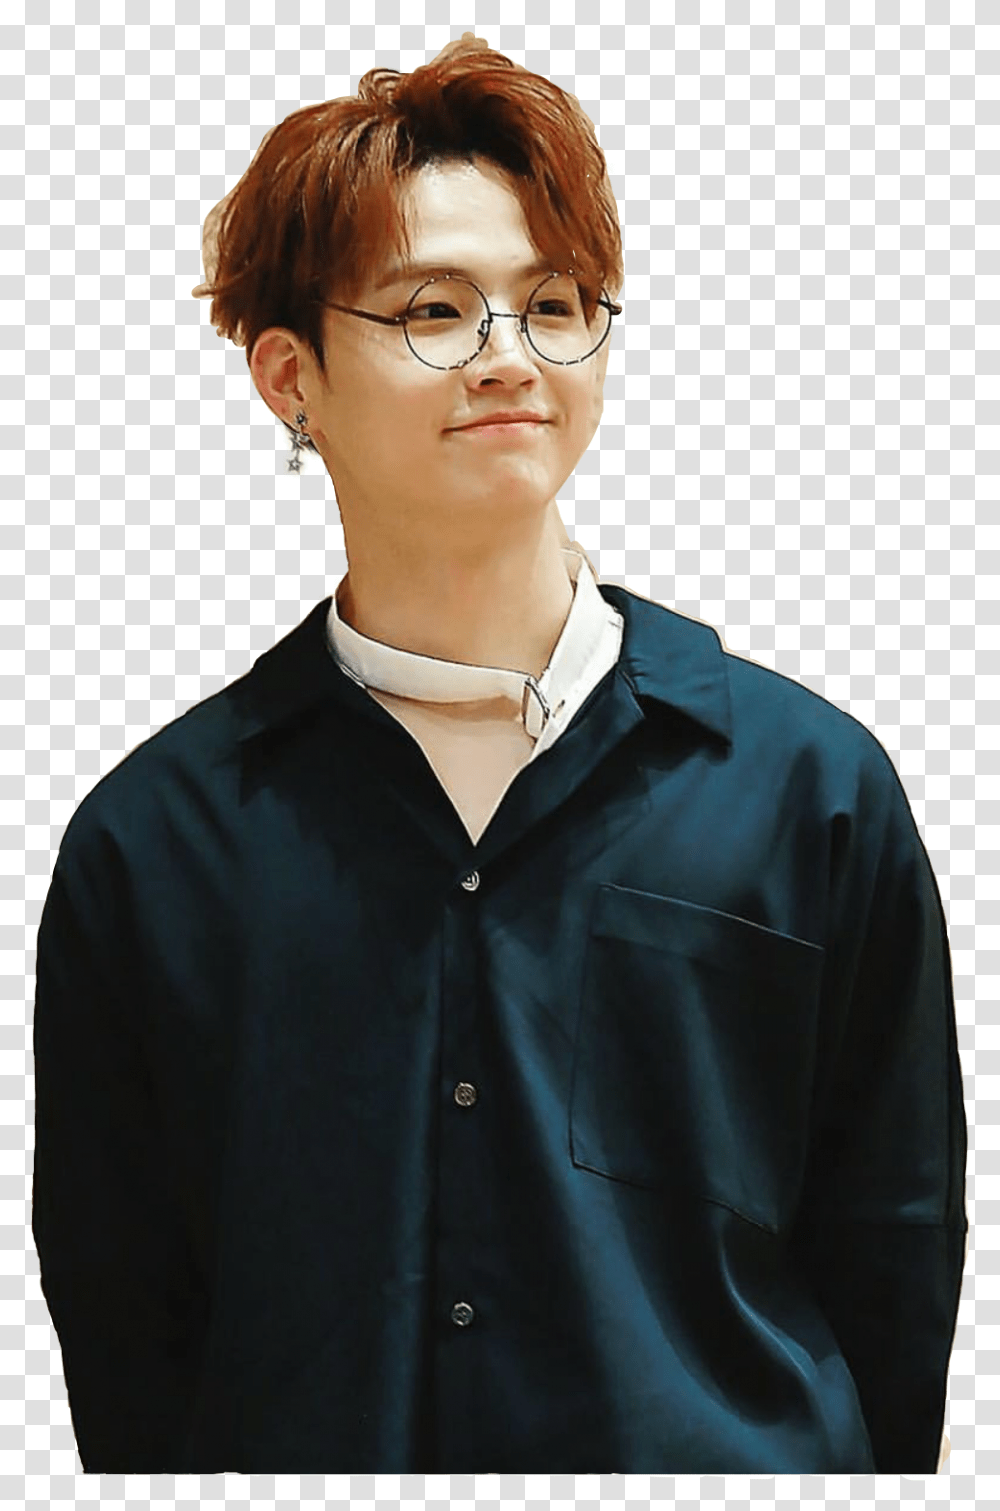 Jackson Wang Instagram Wikipedia Cute Got7 Jb, Person, Clothing, Sleeve, Glasses Transparent Png